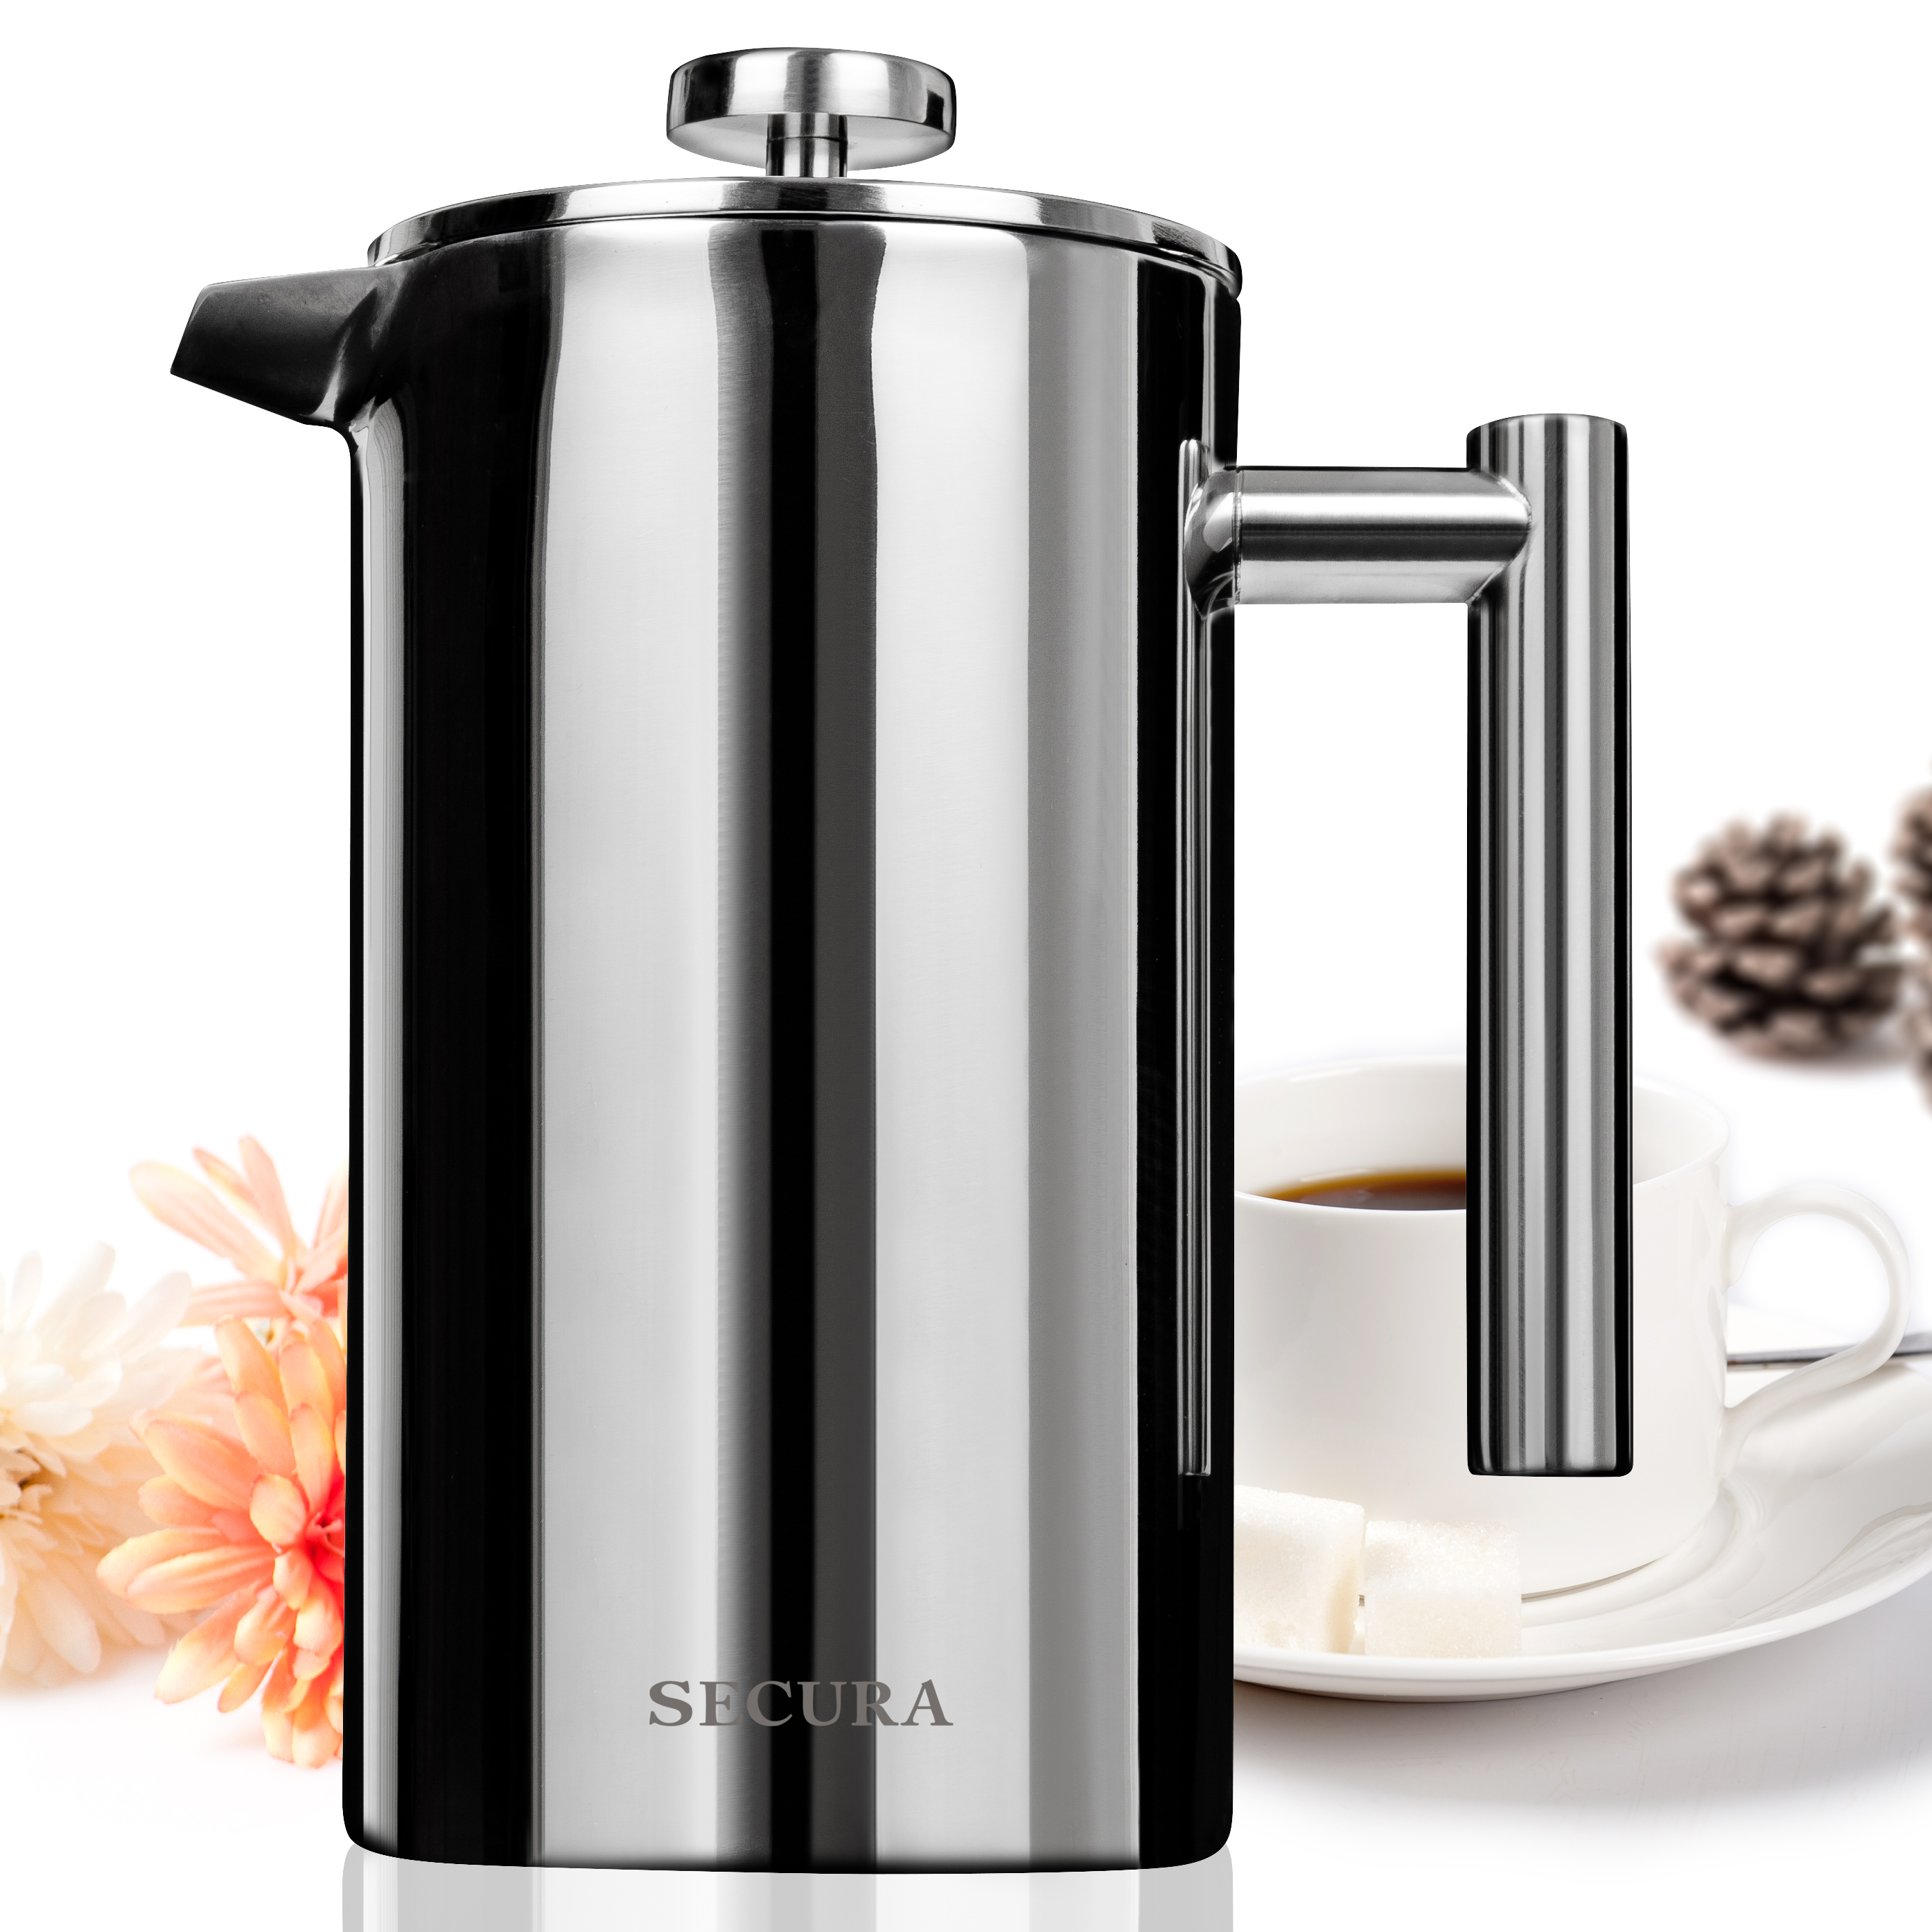 1 Liter SterlingPro Double Wall Stainless Steel French Coffee Press Maker 34 